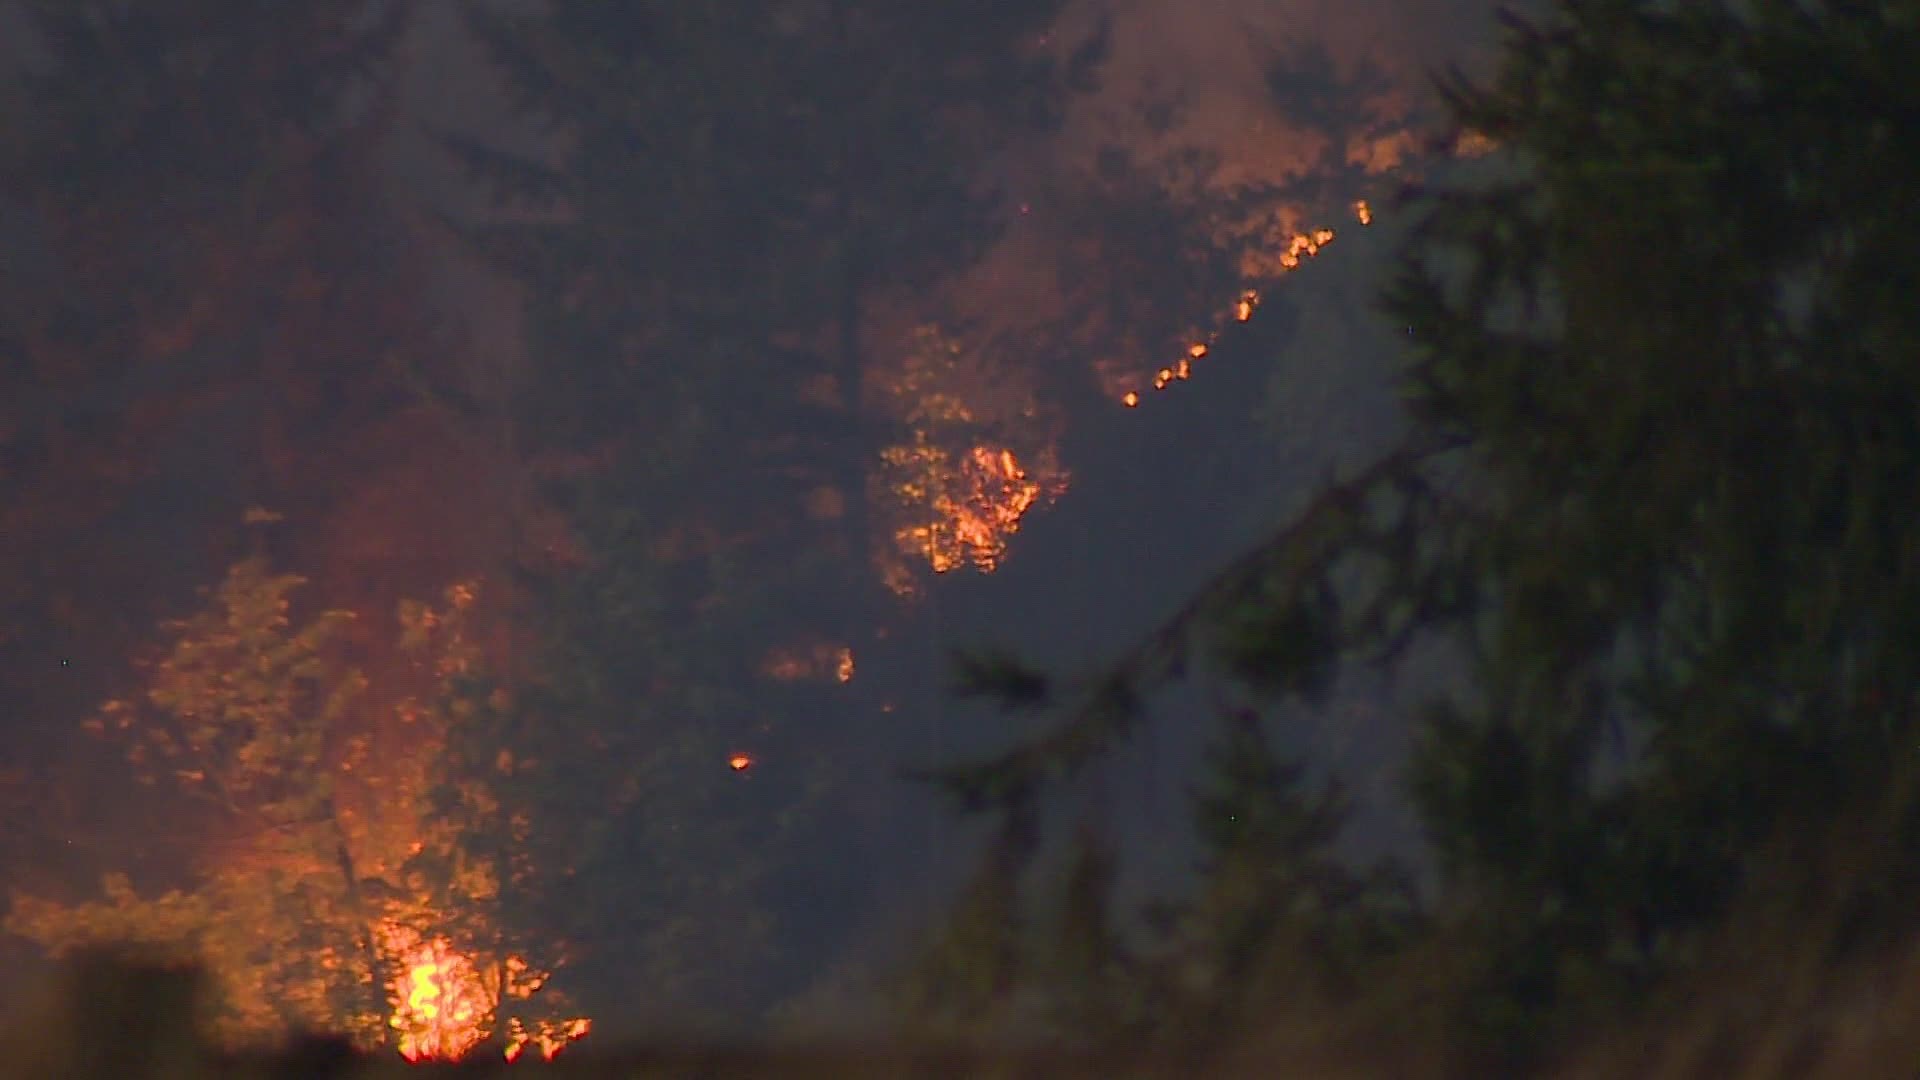 A bill to spend $125 million to prevent and fight wildfires in Washington state was passed by the House and now will go to Gov. Jay Inslee for his signature.